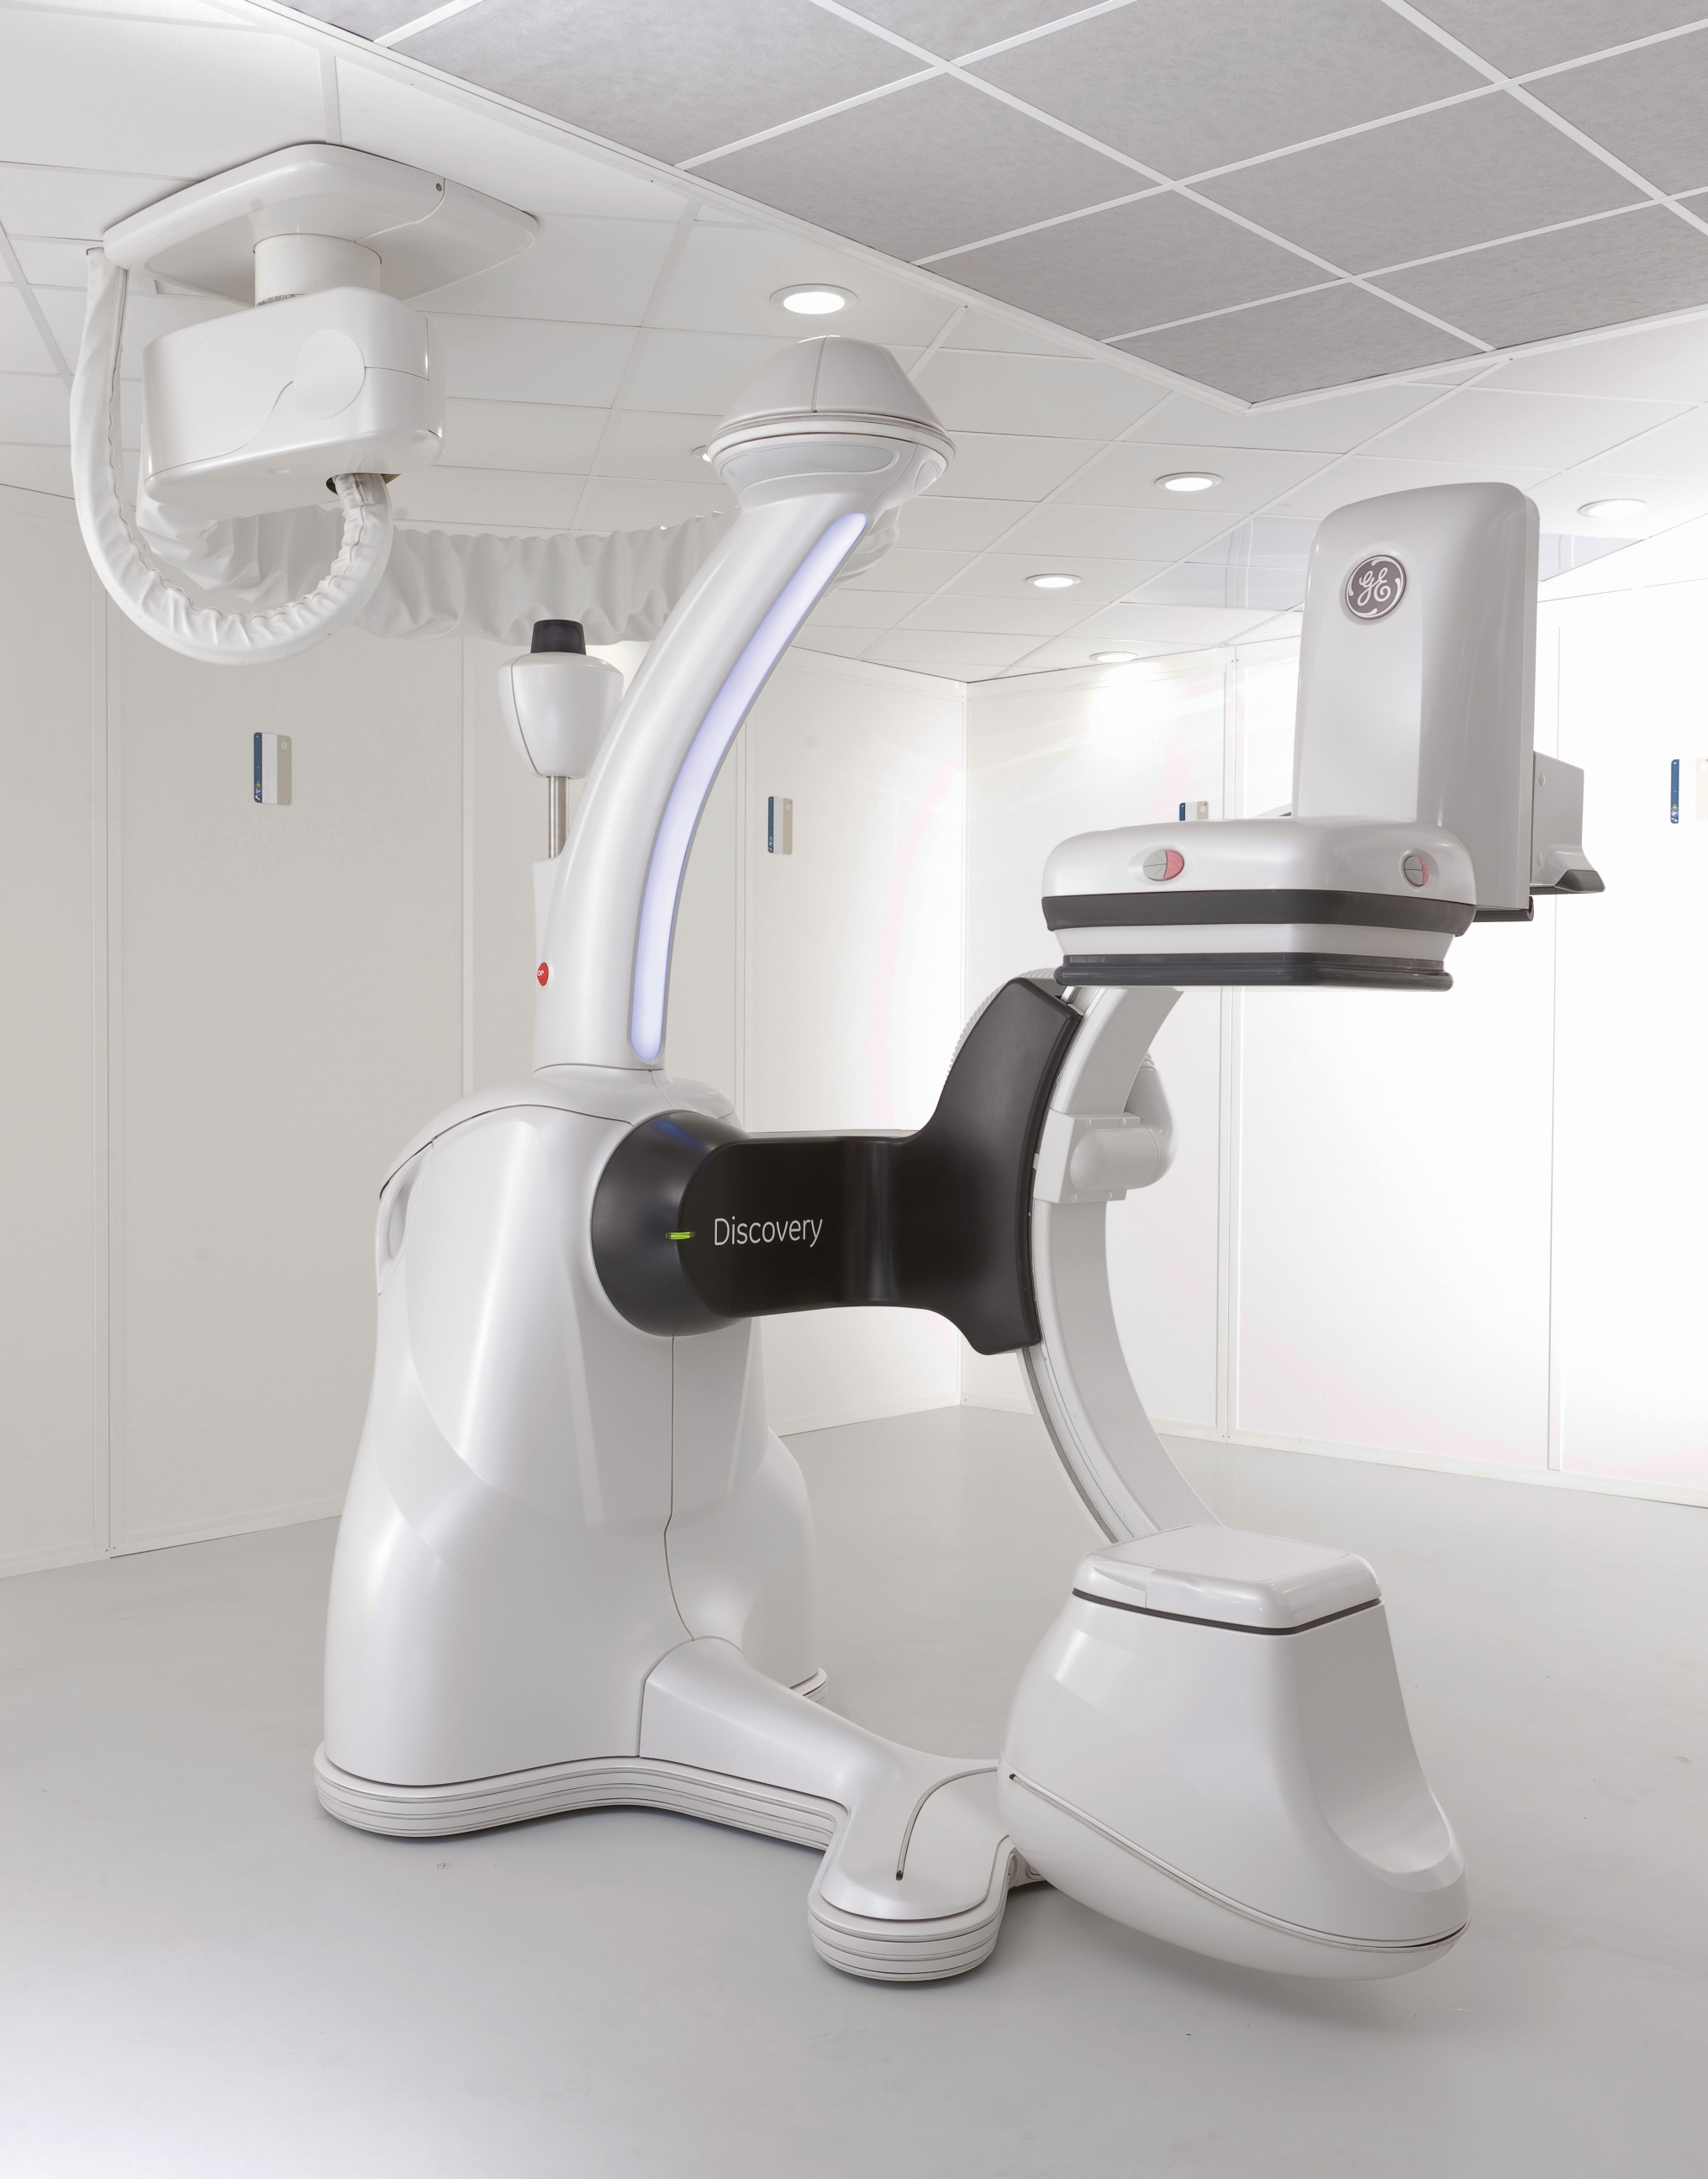 Discovery IGS 730 is a robotics 3D imaging system for minimally invasive surgery co-designed be GE Healthcare and BA Systèmes. This angiography system brings both extremely high-quality imaging and complete workspace freedom to the hybrid operating room. (Image credit: BA Systèmes)